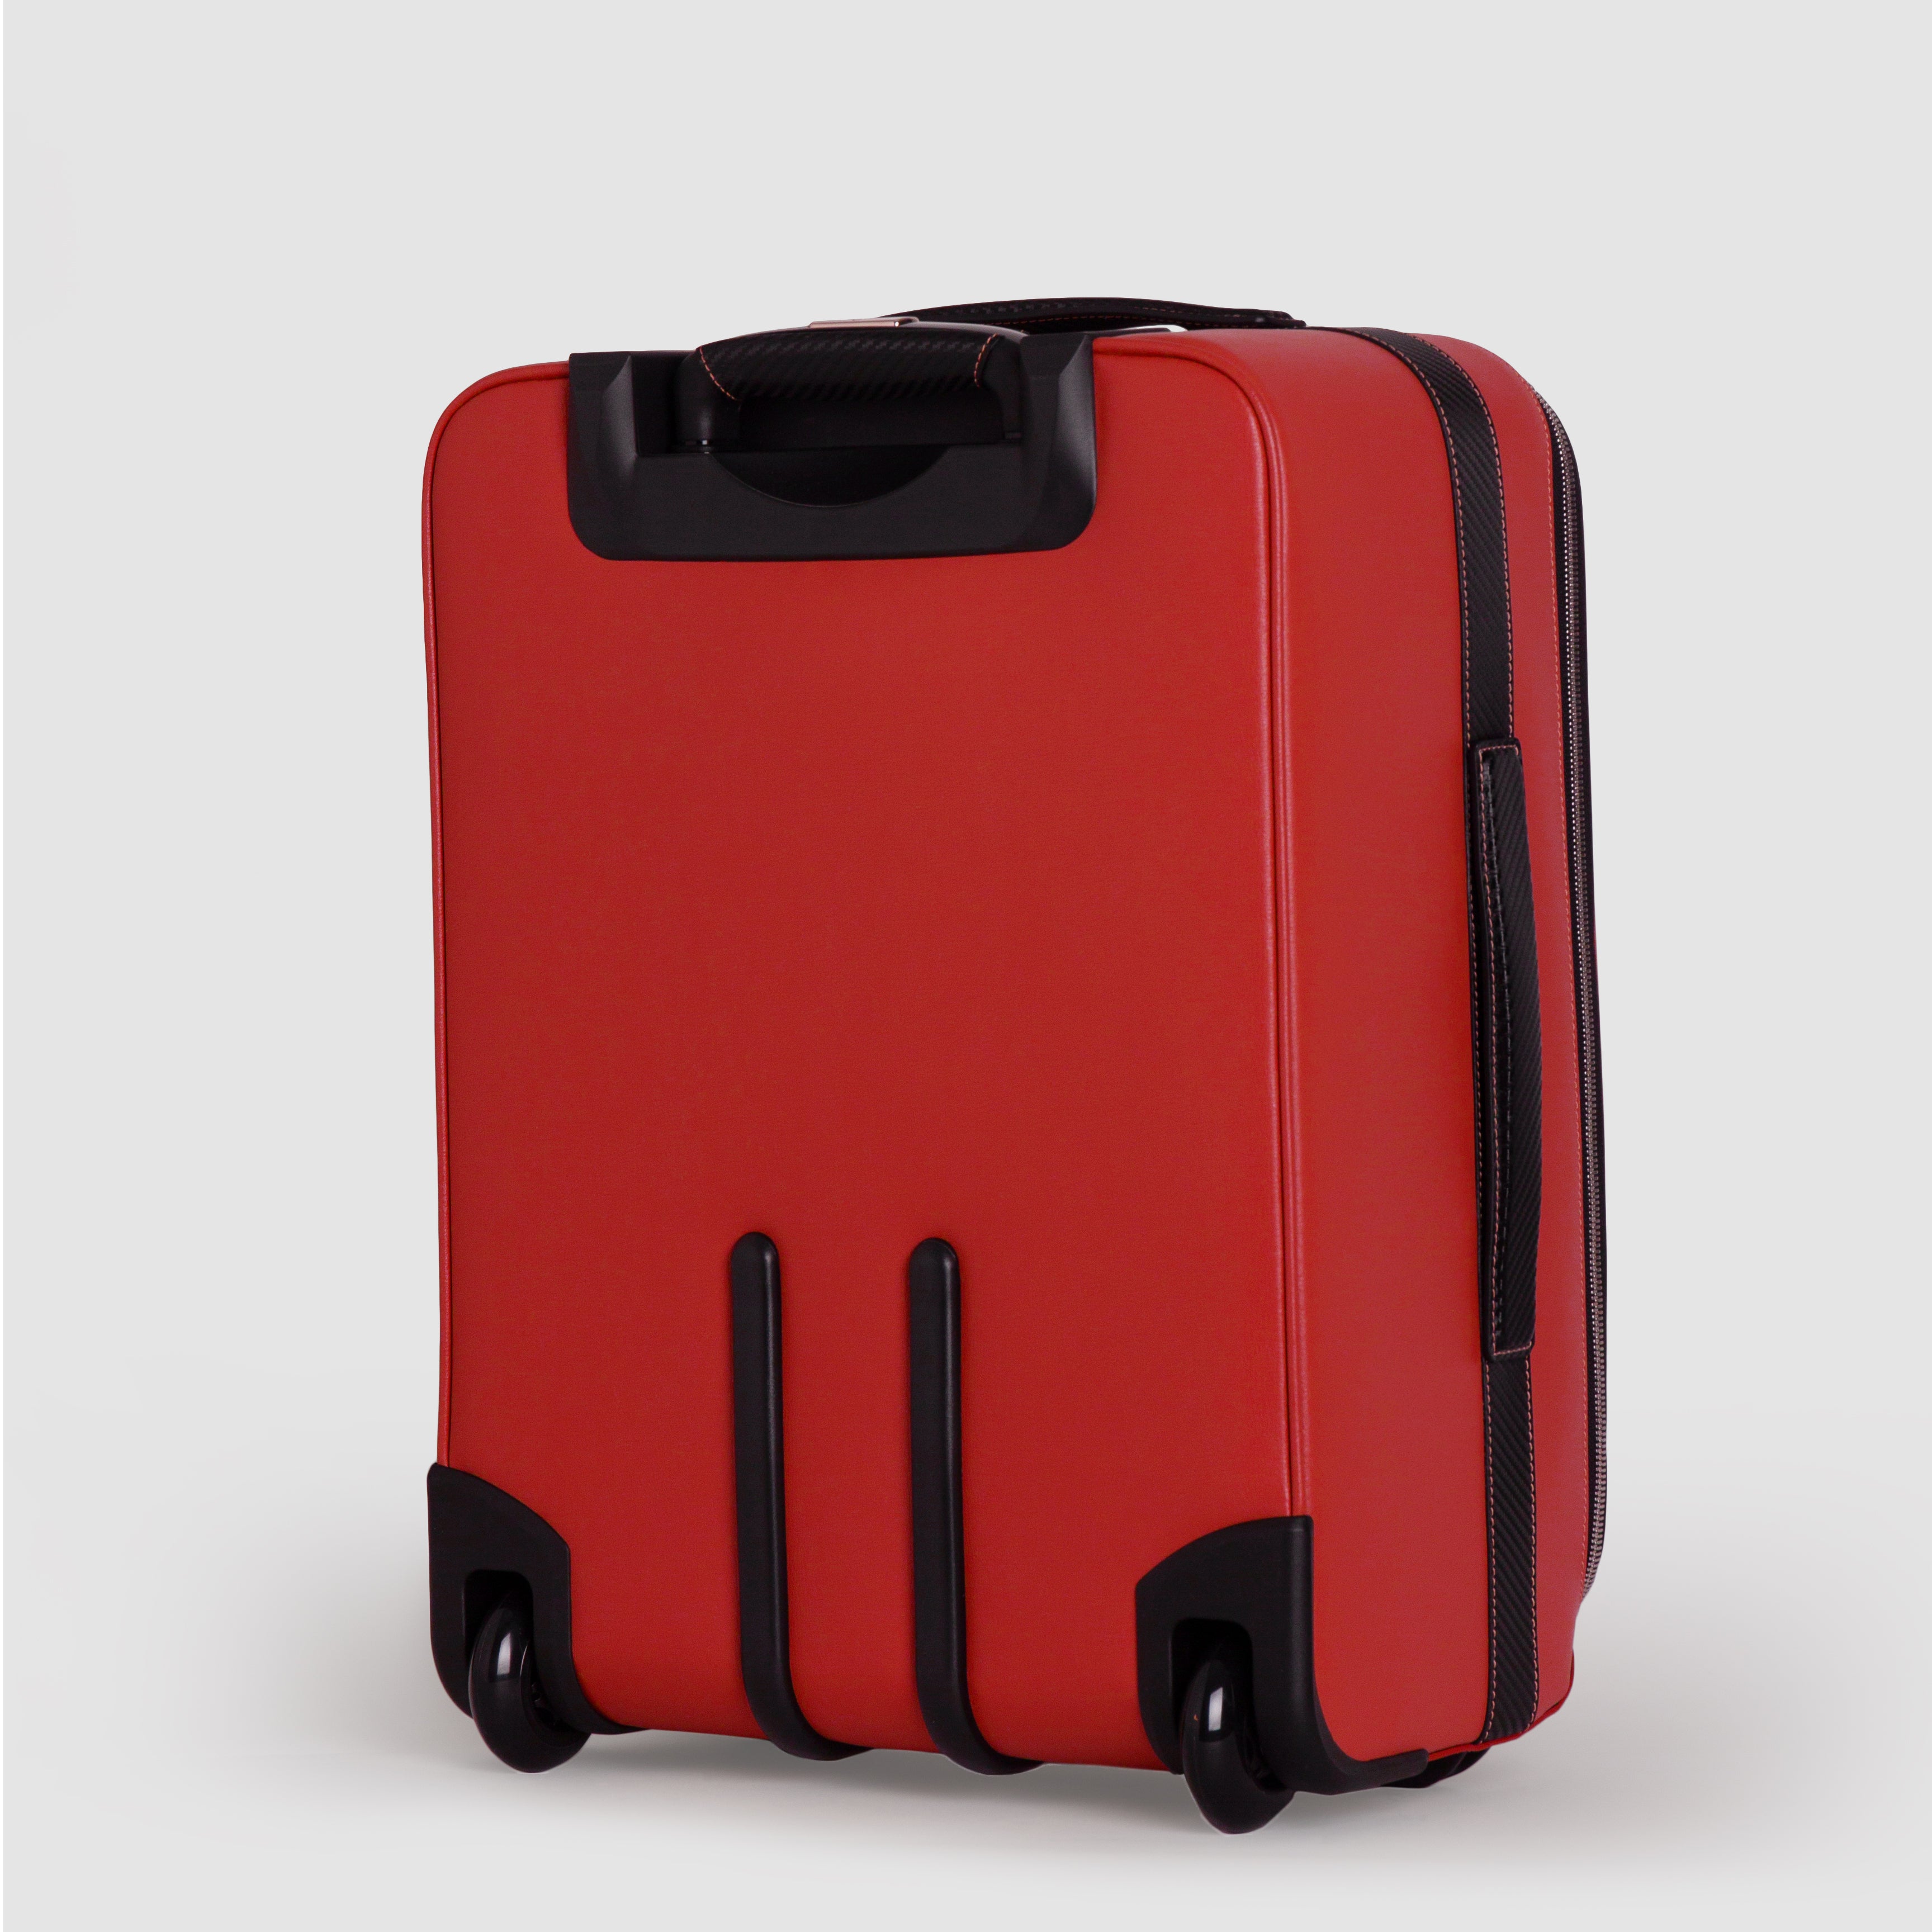 Soul of Nomad Red Carry-On Luggage